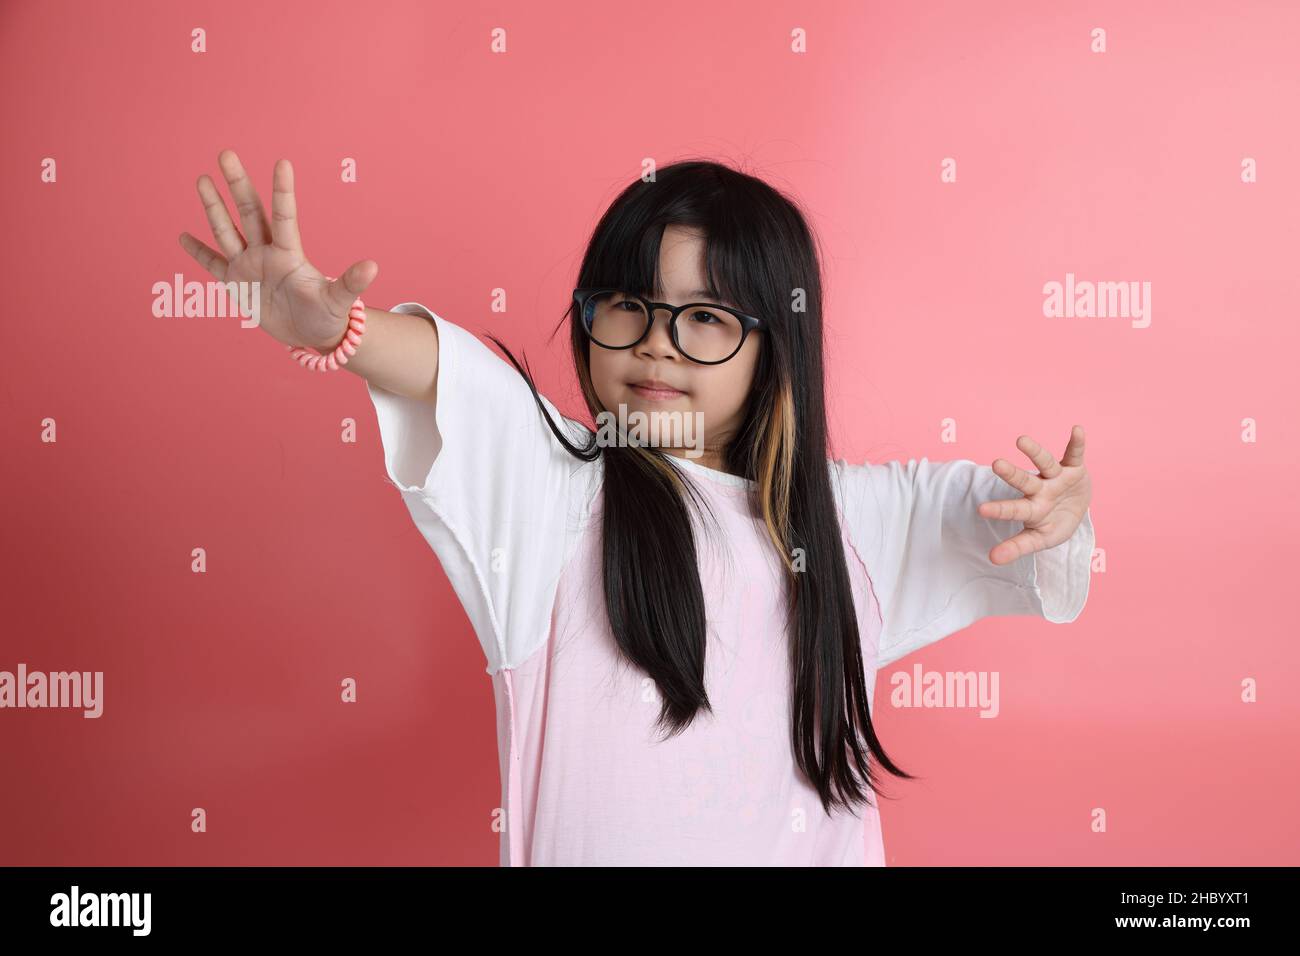 The young Asian girl portrait on the pink background. Stock Photo